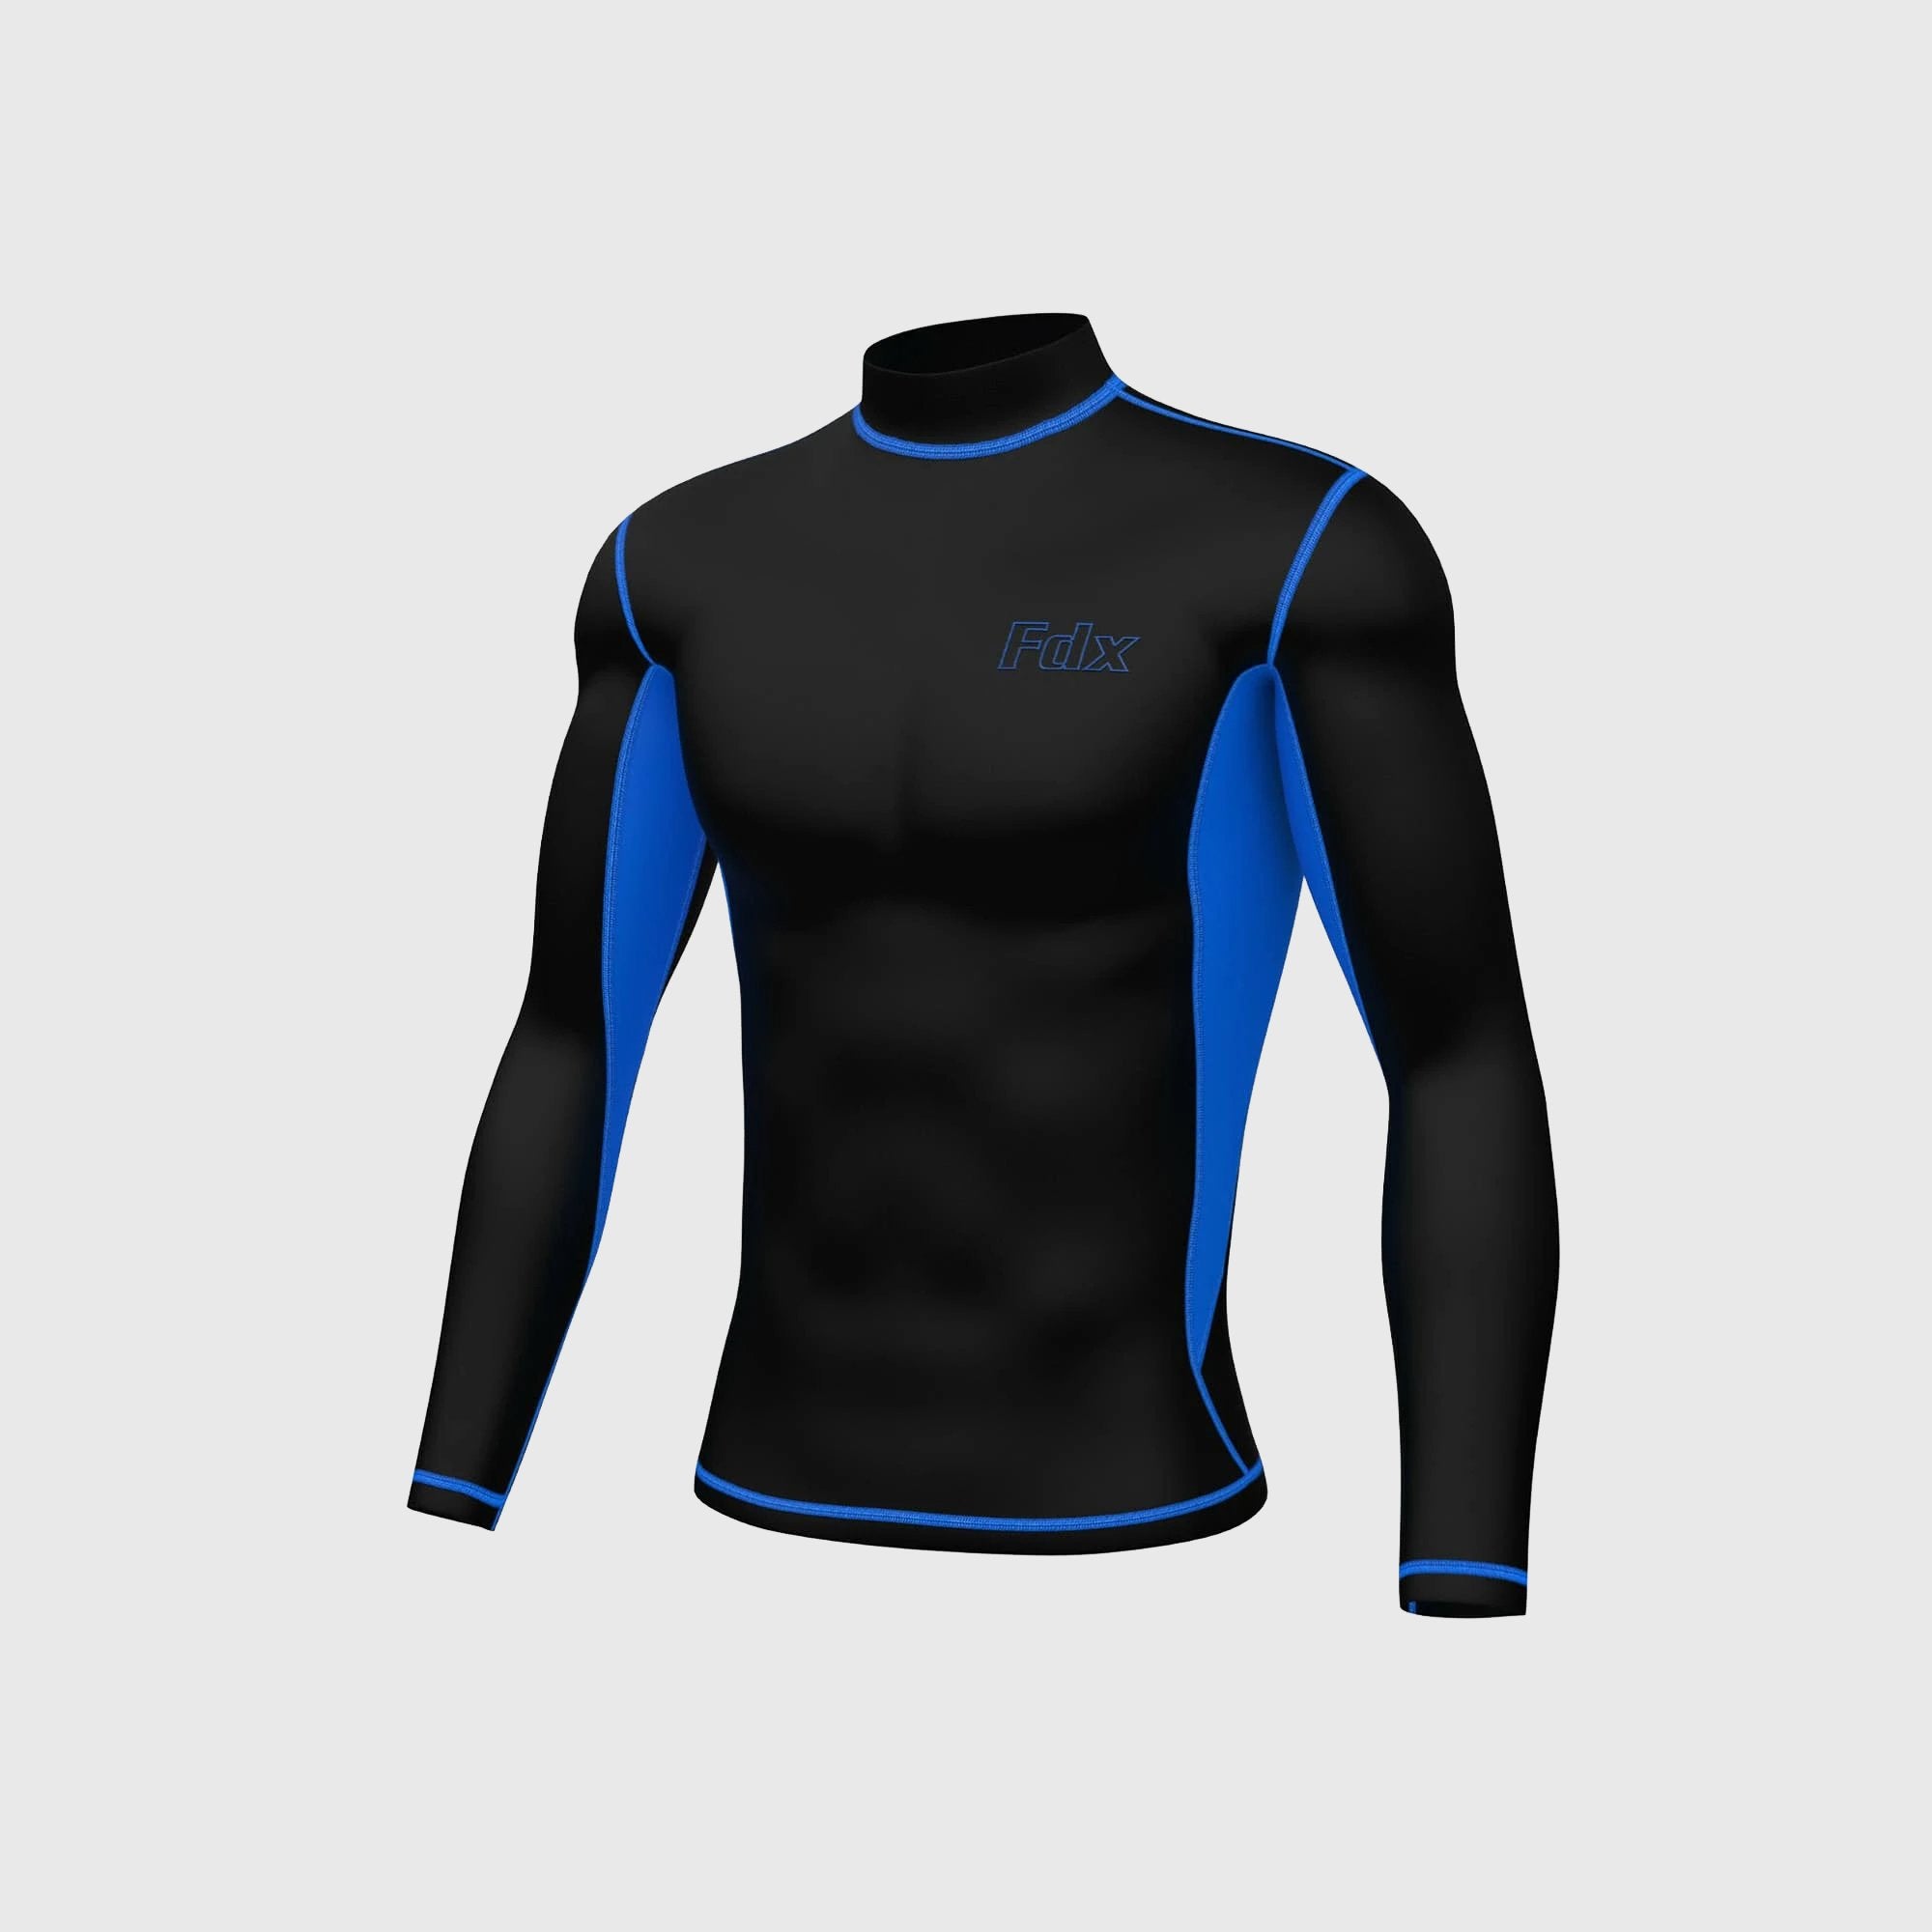 Fdx Inorex Blue Men's Thermal Winter Base Layer Compression Top